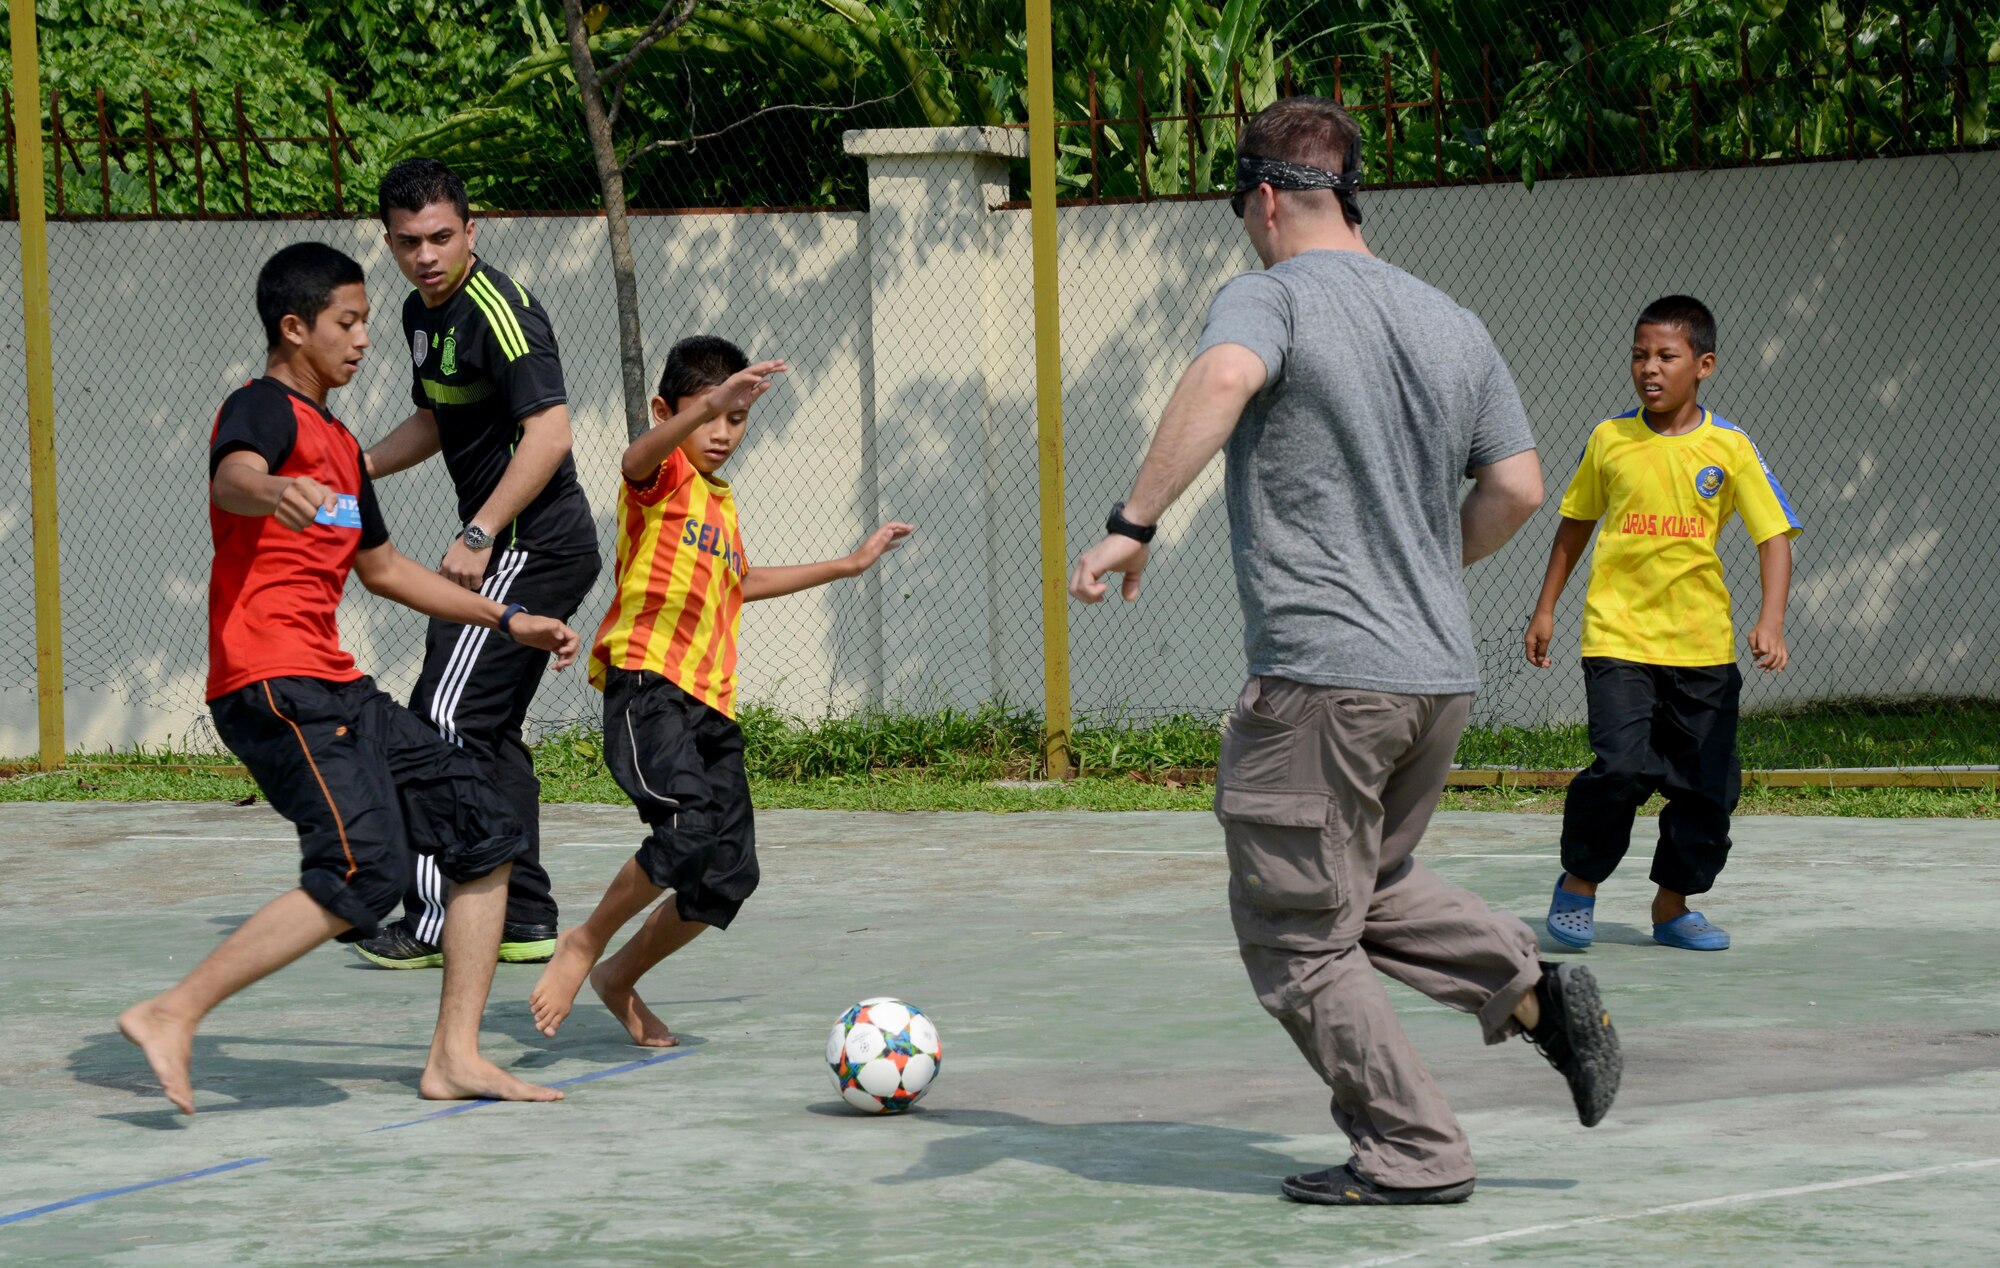 Tech. Sgt. Ryan Moore a loadmaster with the 17th Special Operations Squadron and a member from the Royal Malaysian Air Force play soccer with the children at the Rumah Kasih Hormoni Orphanage near Kuala Lumpur, Malaysia, June 6, 2015.  As part of Exercise Teak Mint, members from the RMAF, U.S. Air Force came together to help with repairs around the orphanage and donated more than $1,000 in clothes, games and sports equipment.  (U.S. Air Force photo by Tech. Sgt. Kristine Dreyer)